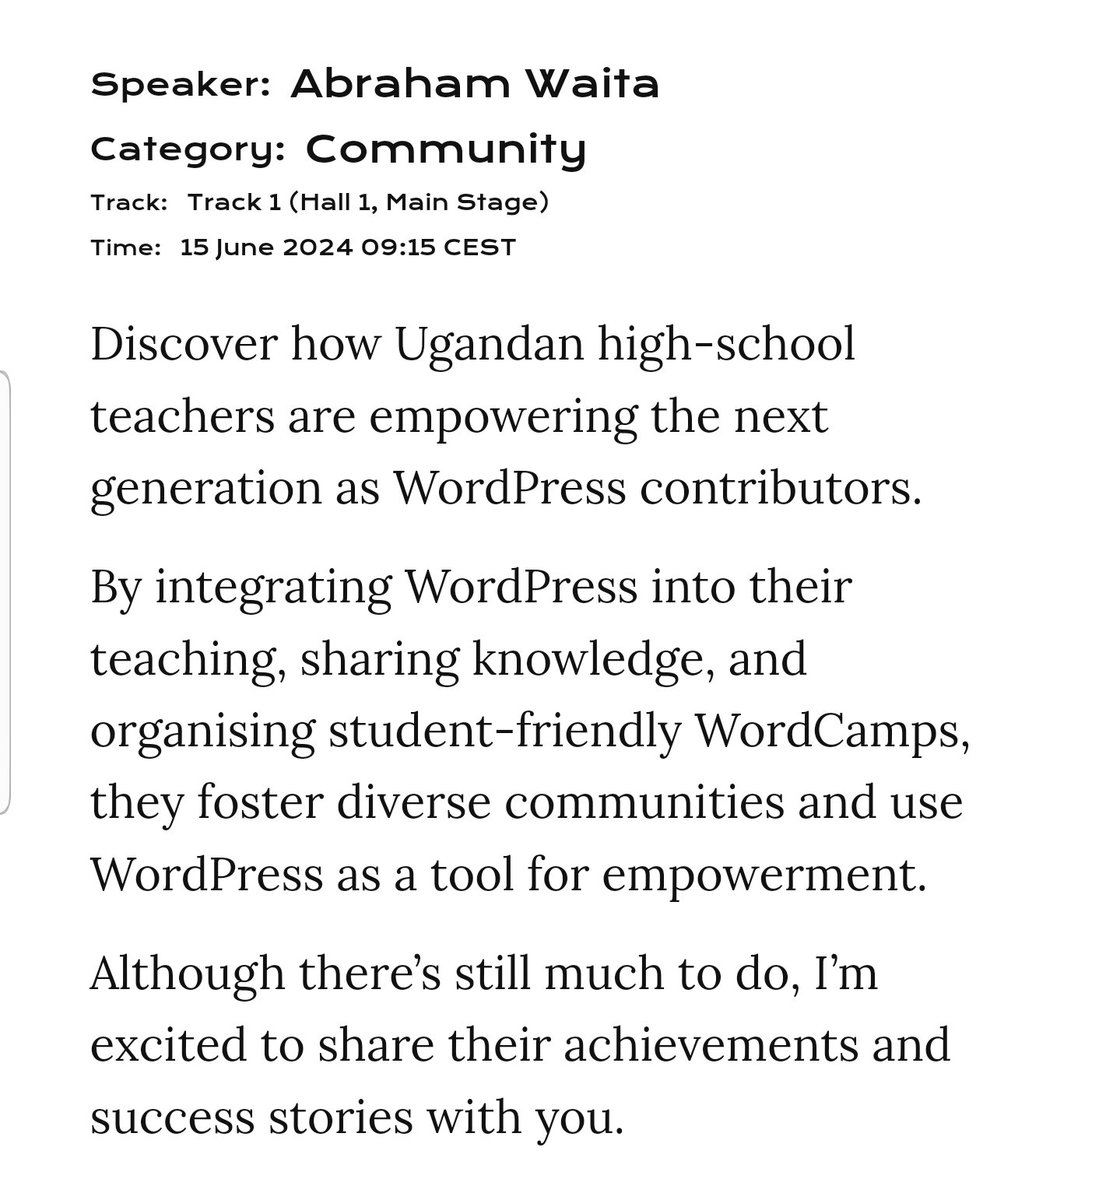 The world is watching! We are glad that our initiatives and efforts over the last 5 years will be highlighted at the upcoming @WCEurope in a talk by @ab_waitar. europe.wordcamp.org/2024/session/d… #RestlessTeachers #EachOneTeachOne